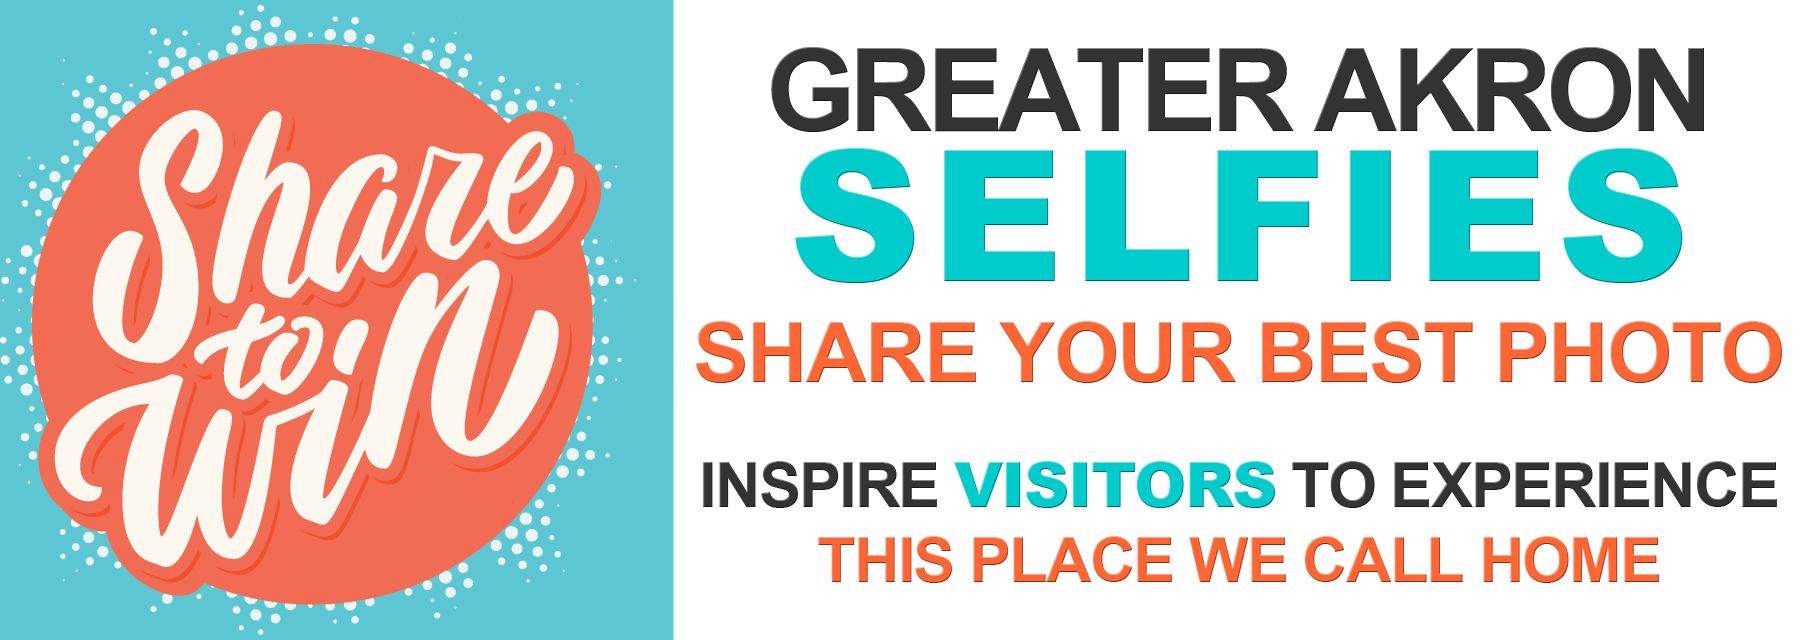 Greater Akron Selfies - Share Your Best Photo - Inspire Visitors to Experience This Place To Call Home